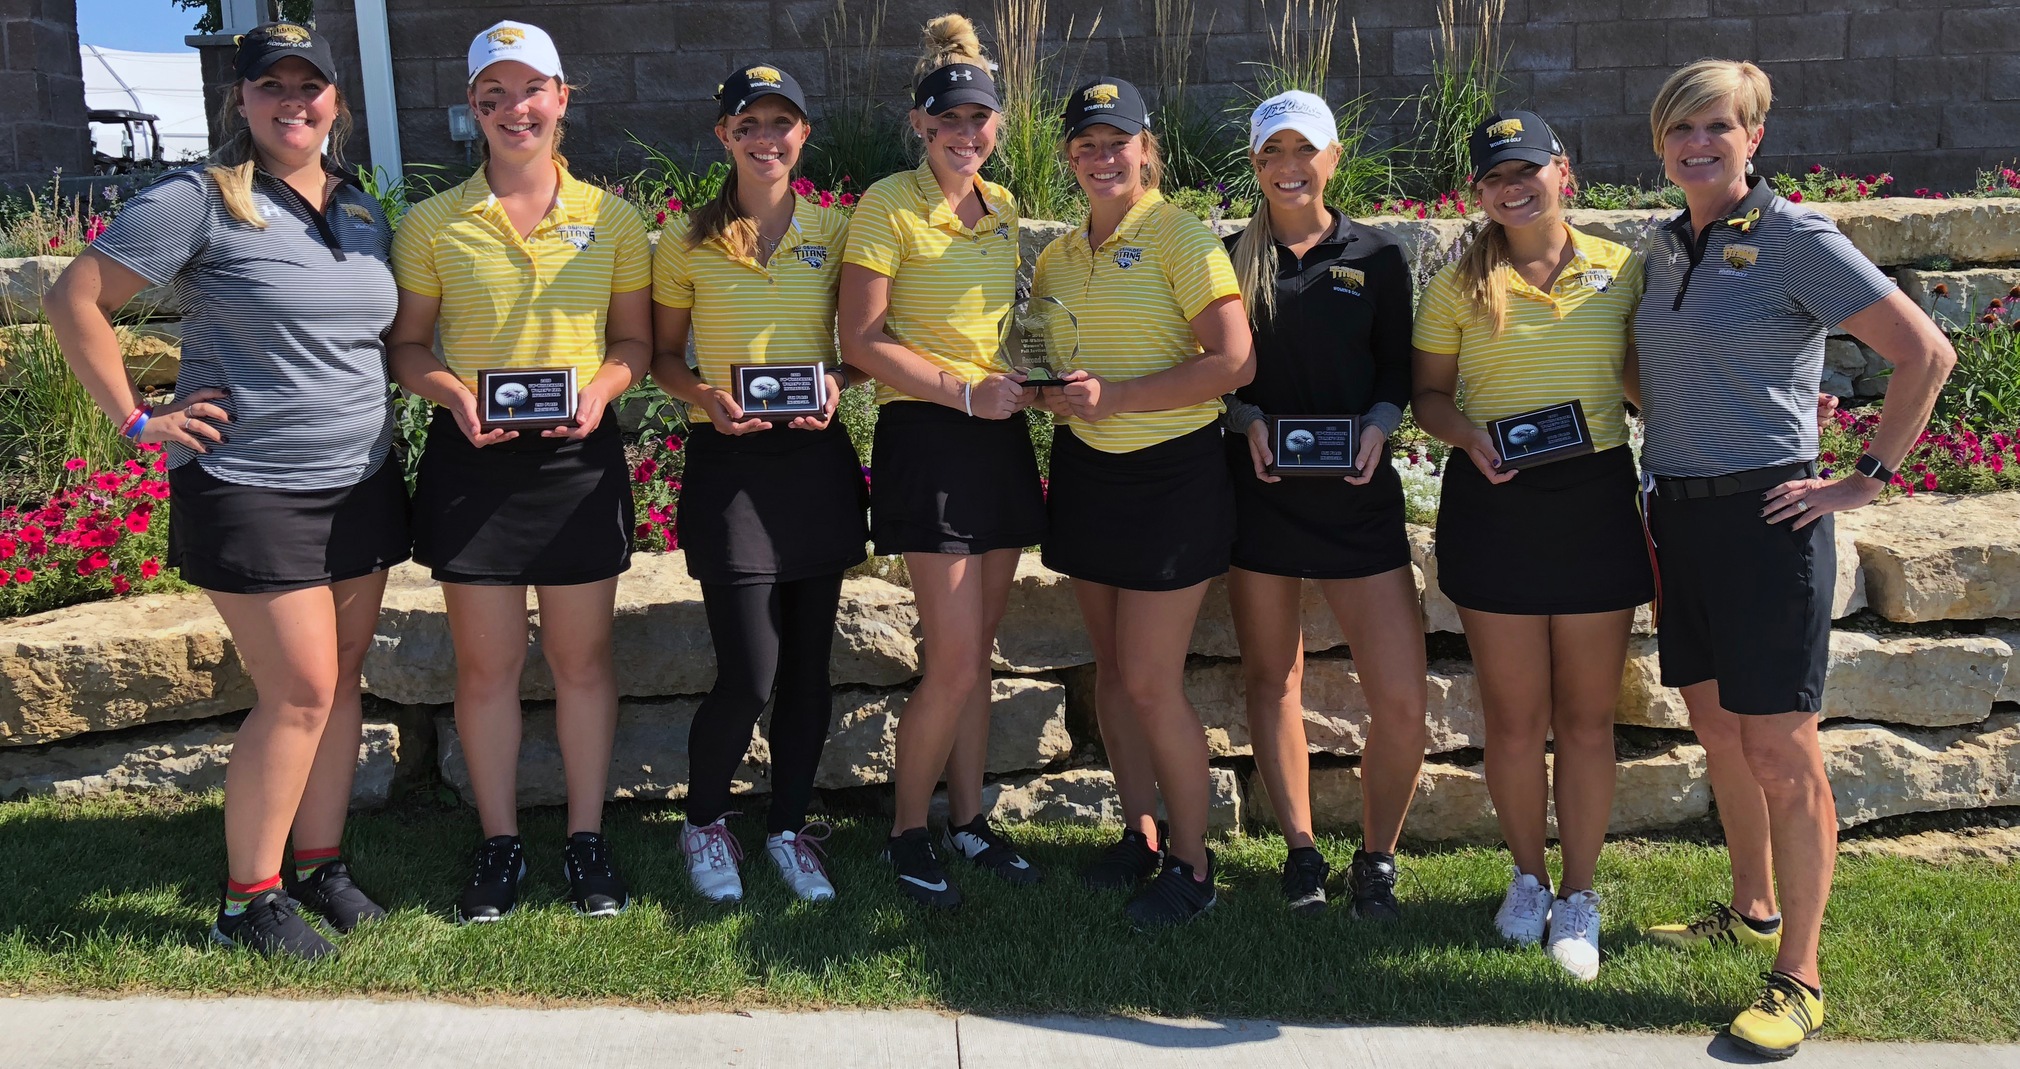 UW-Oshkosh has finished in the top three in three of its four tournaments this fall, including a second-place ranking at the UW-Whitewater Invitational.